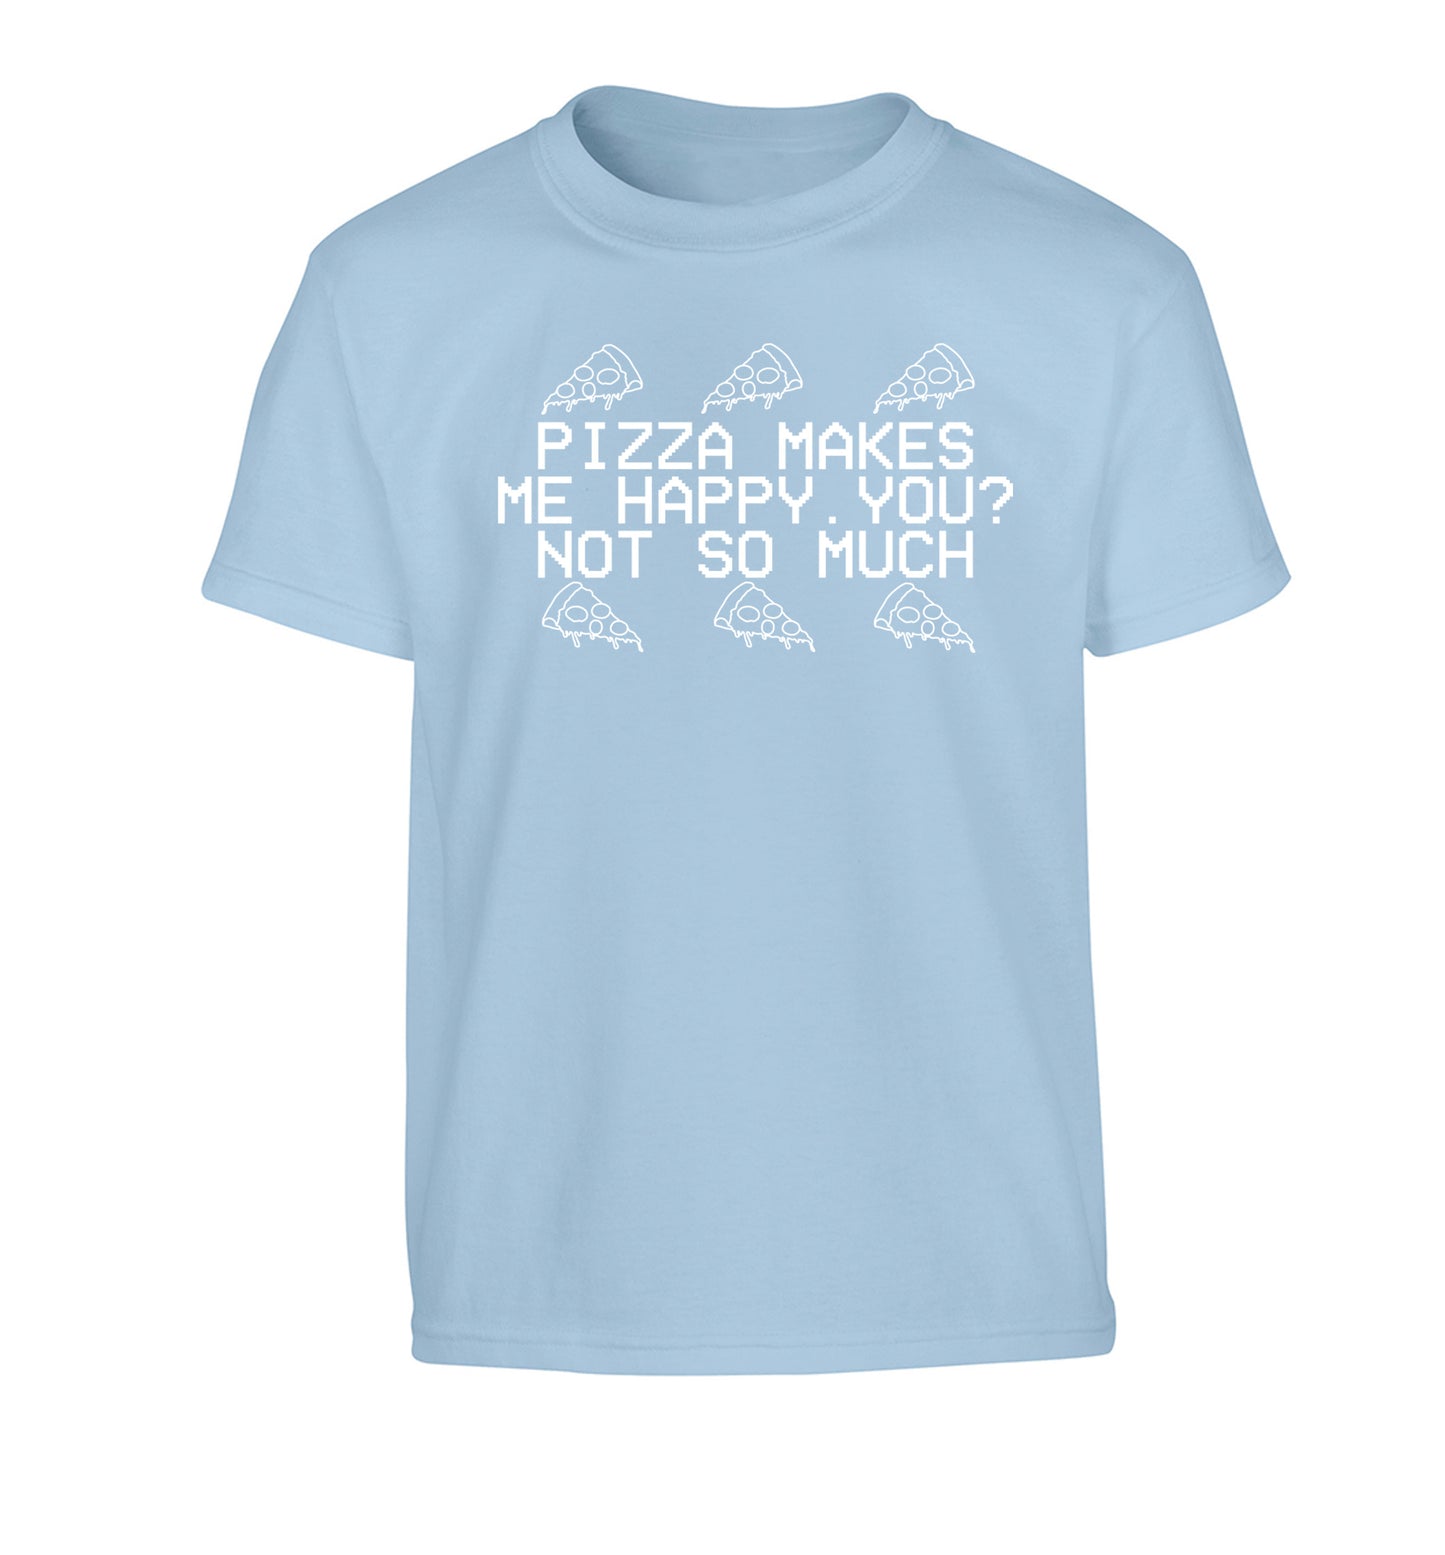 Pizza makes me happy, You? Not so much Children's light blue Tshirt 12-14 Years